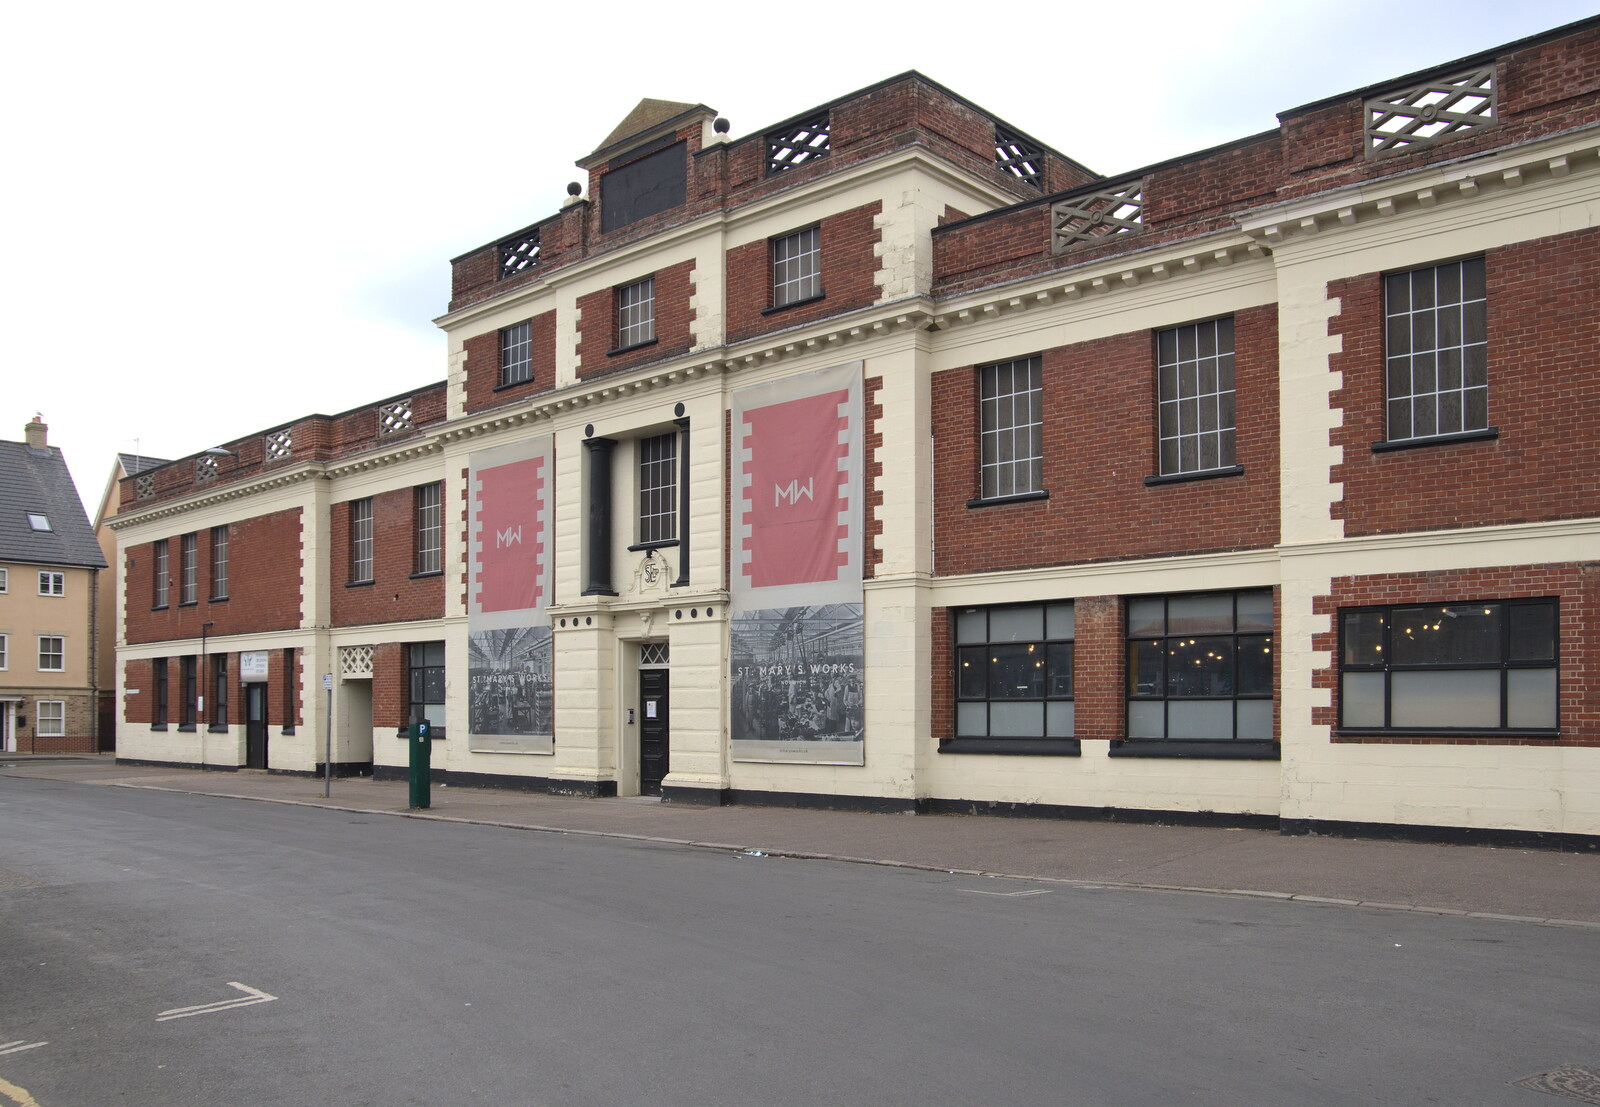 The grand St. Mary's Works in the Shoe Quarter from Discovering the Hidden City: Norwich, Norfolk - 23rd May 2022